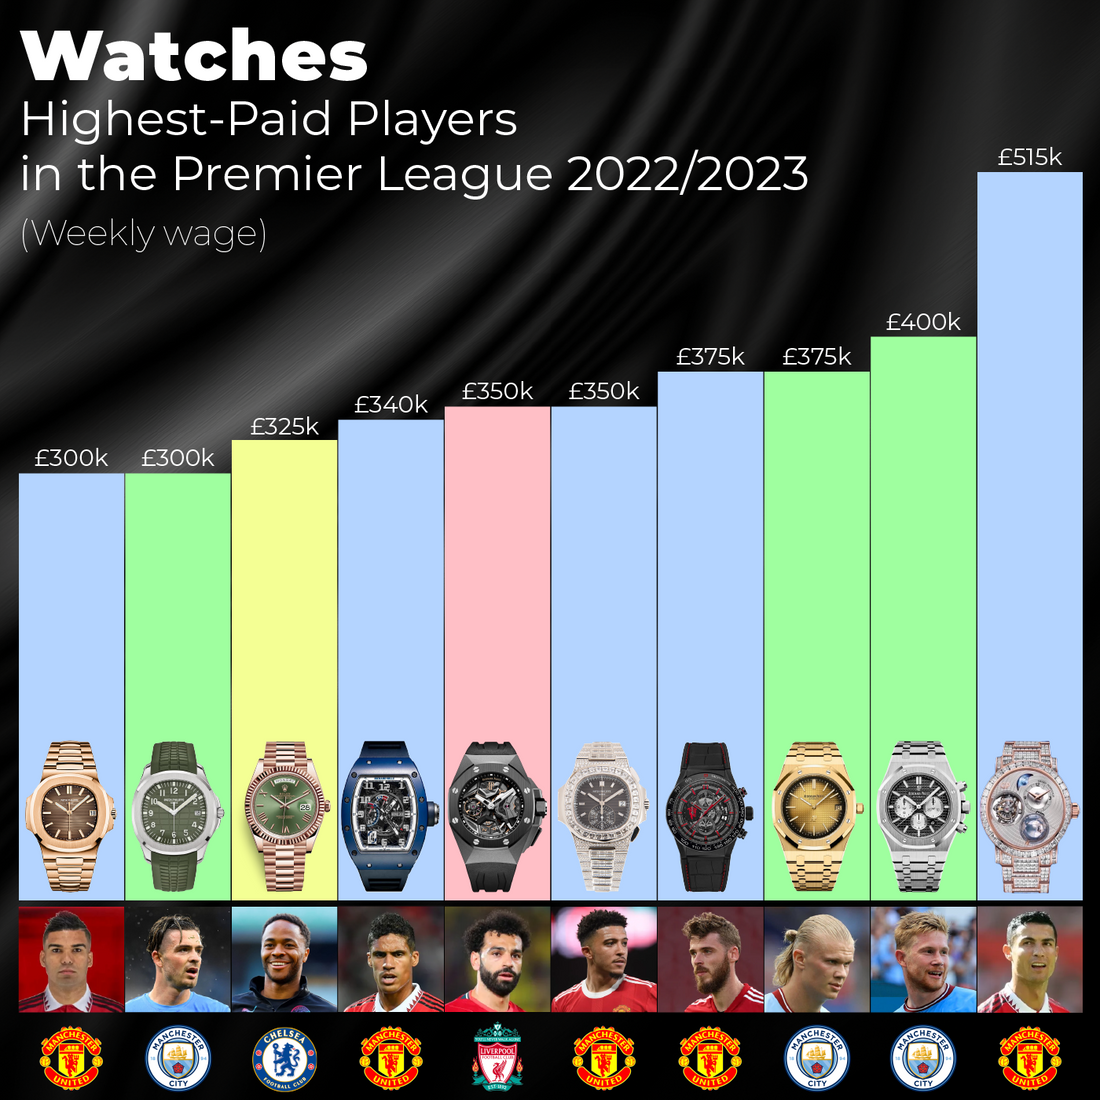 Watches of Highest-Paid Premier League Players 2022/2023